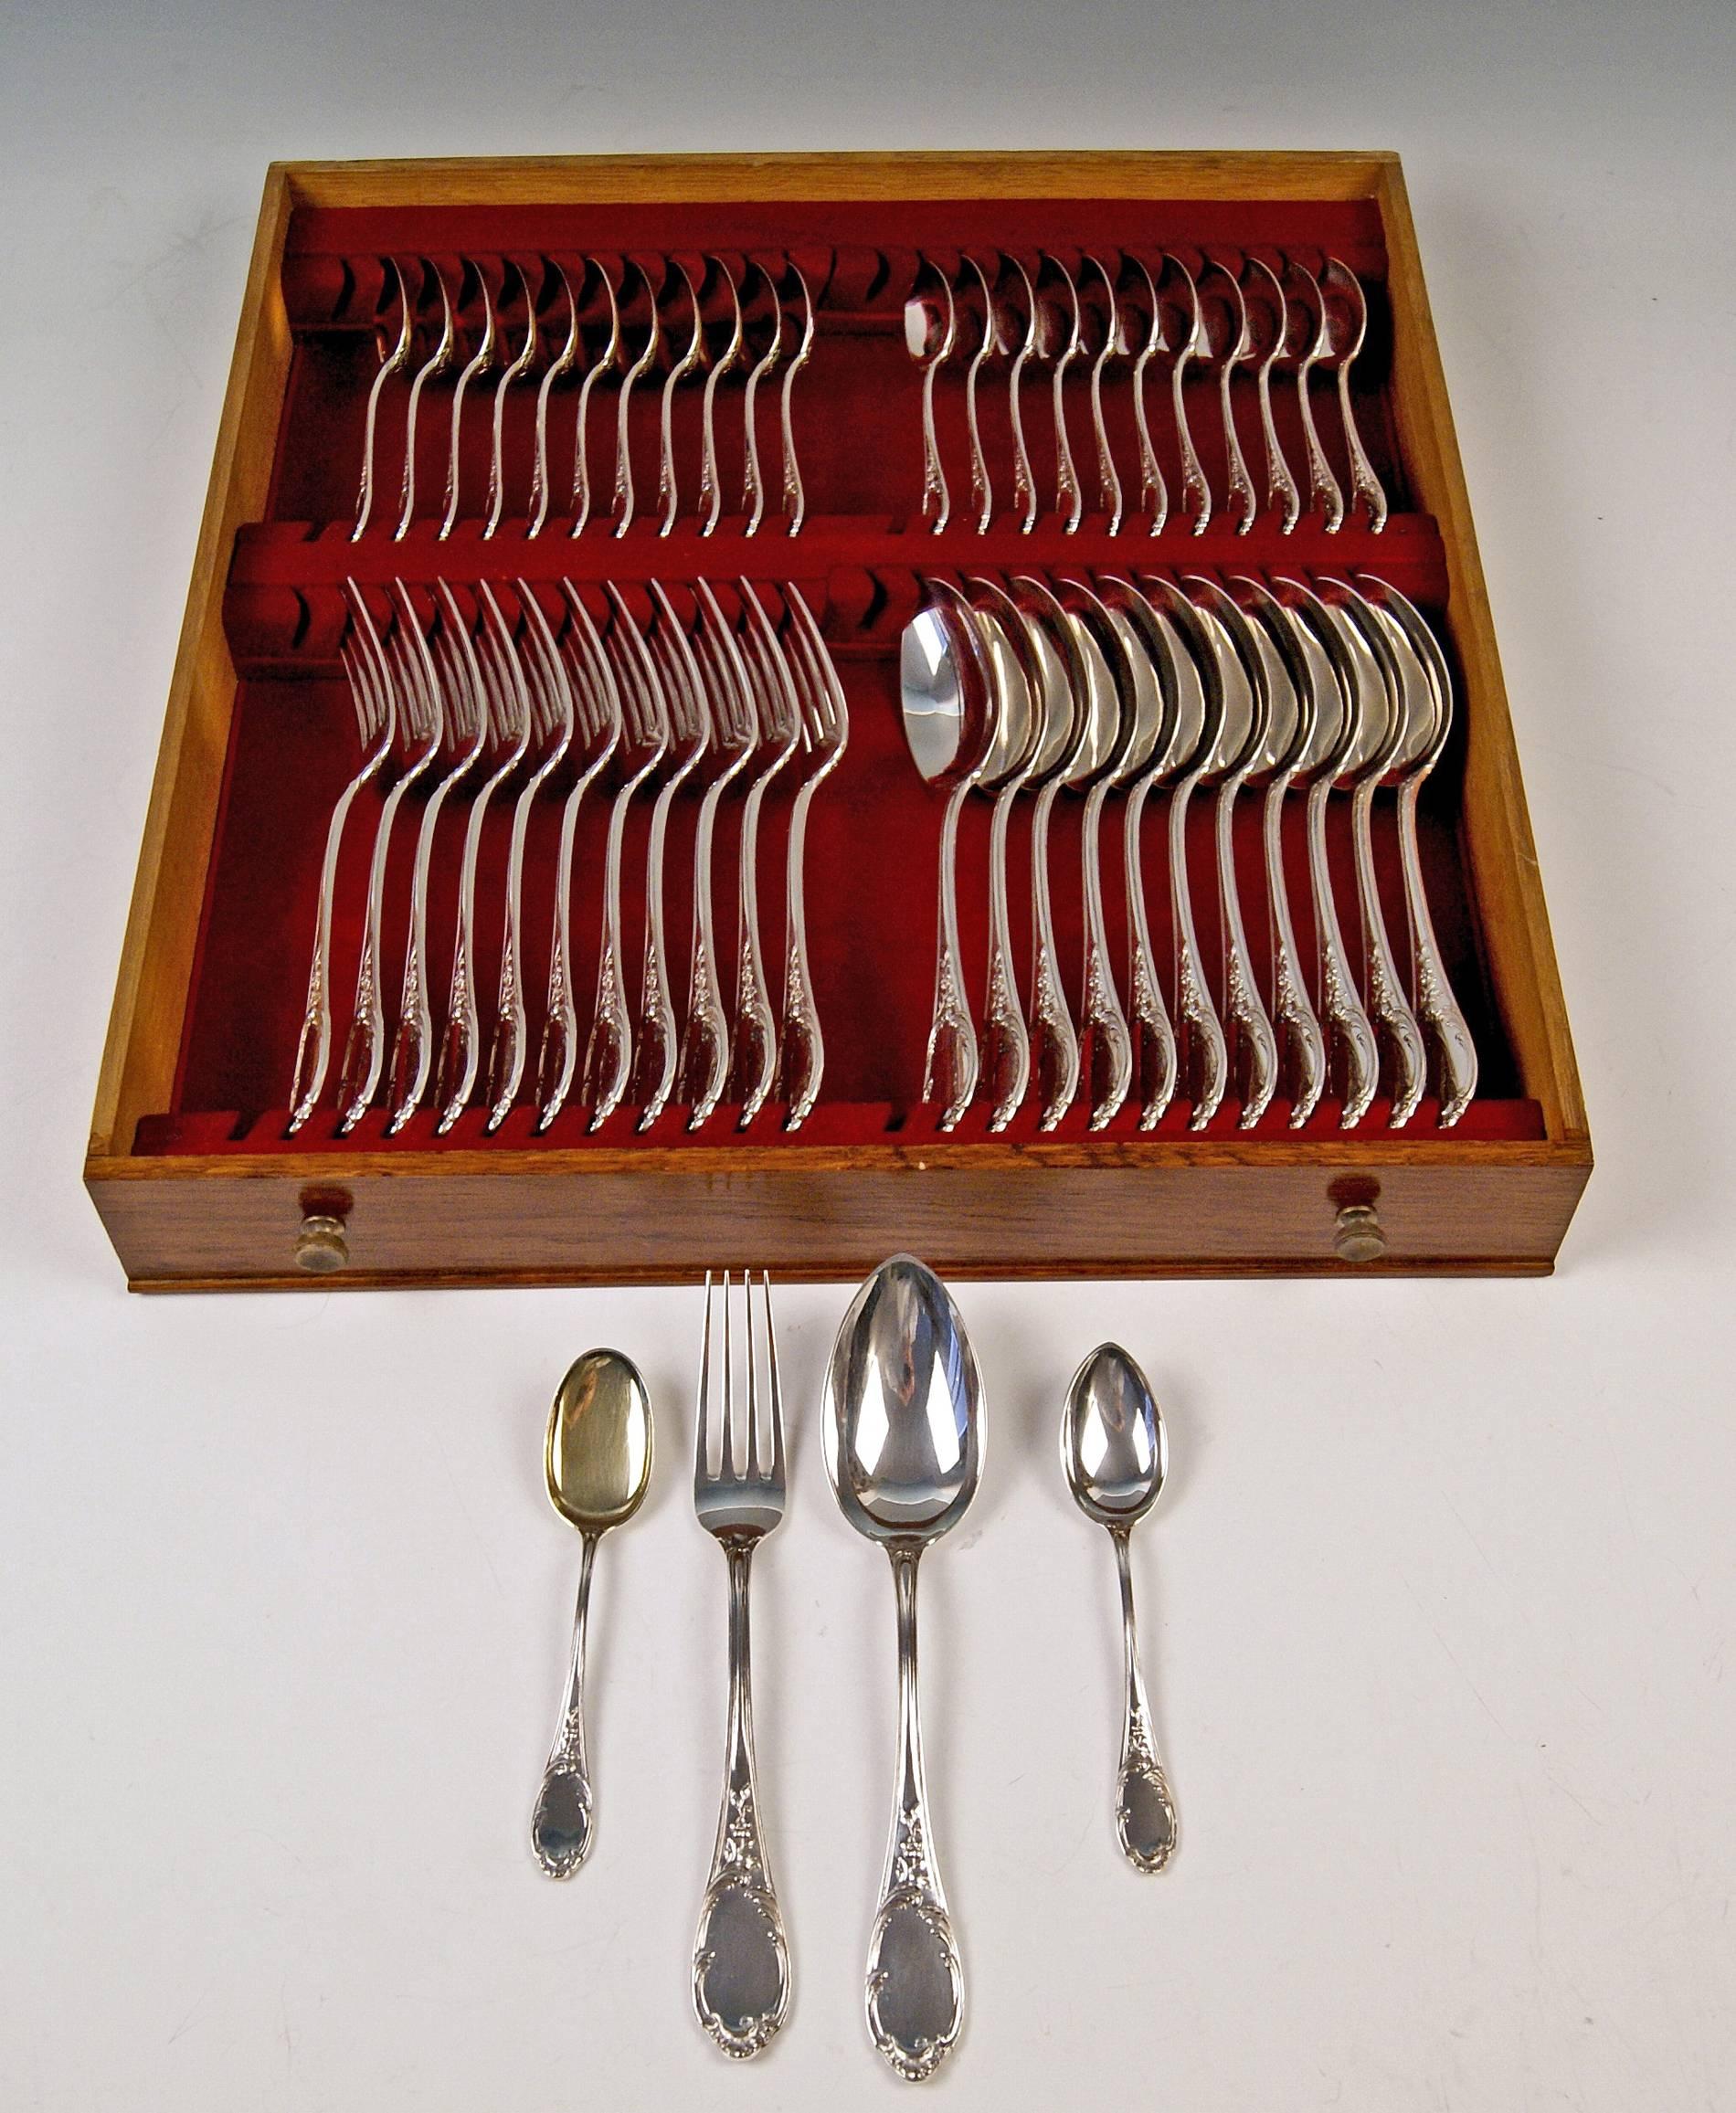 flatware made in germany